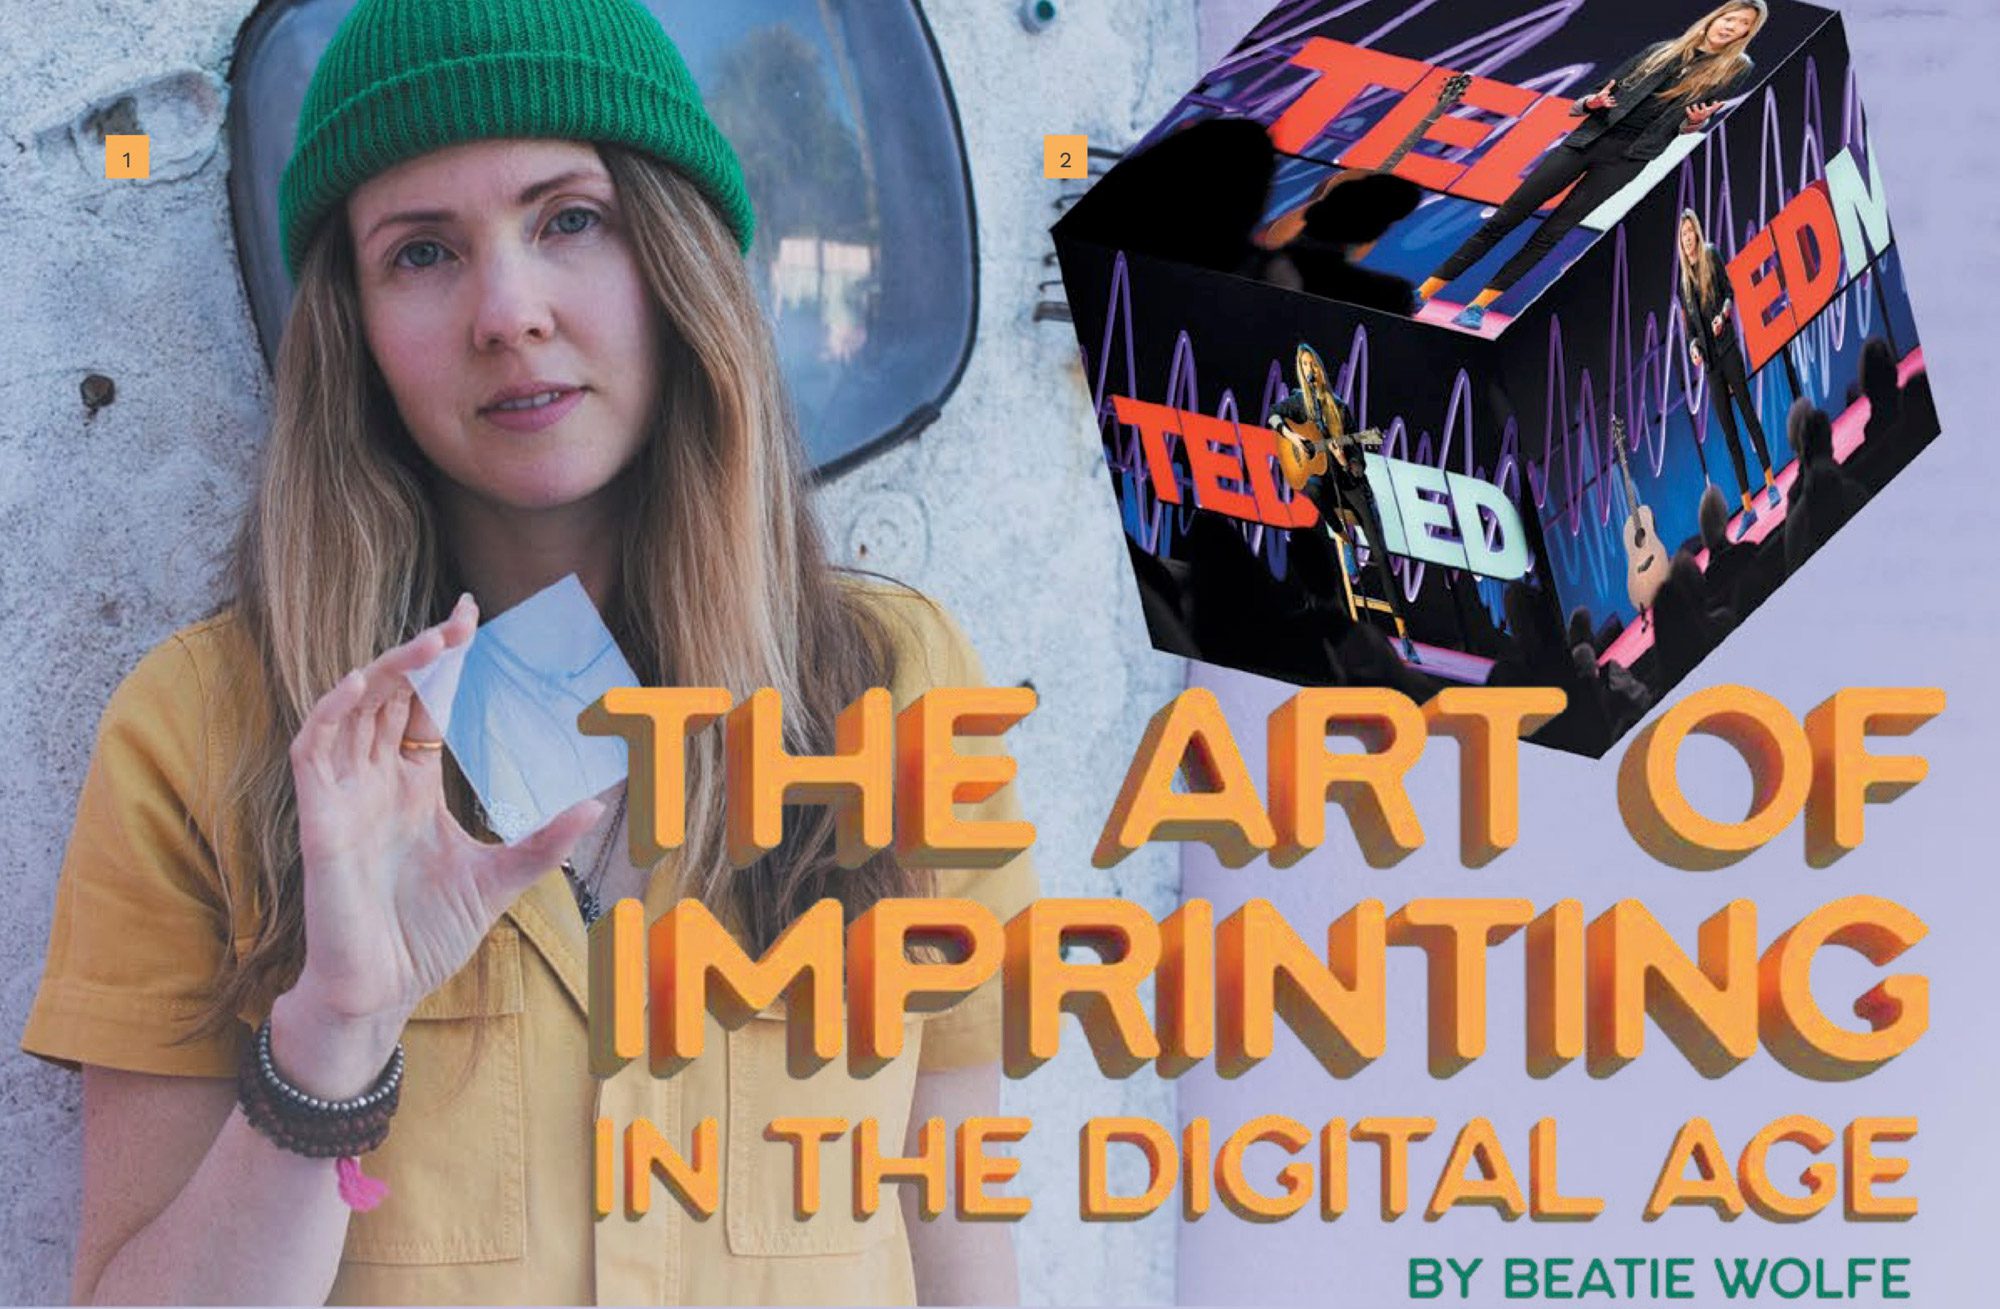 The Art of Imprinting In The Digital Age by Beatie Wolfe